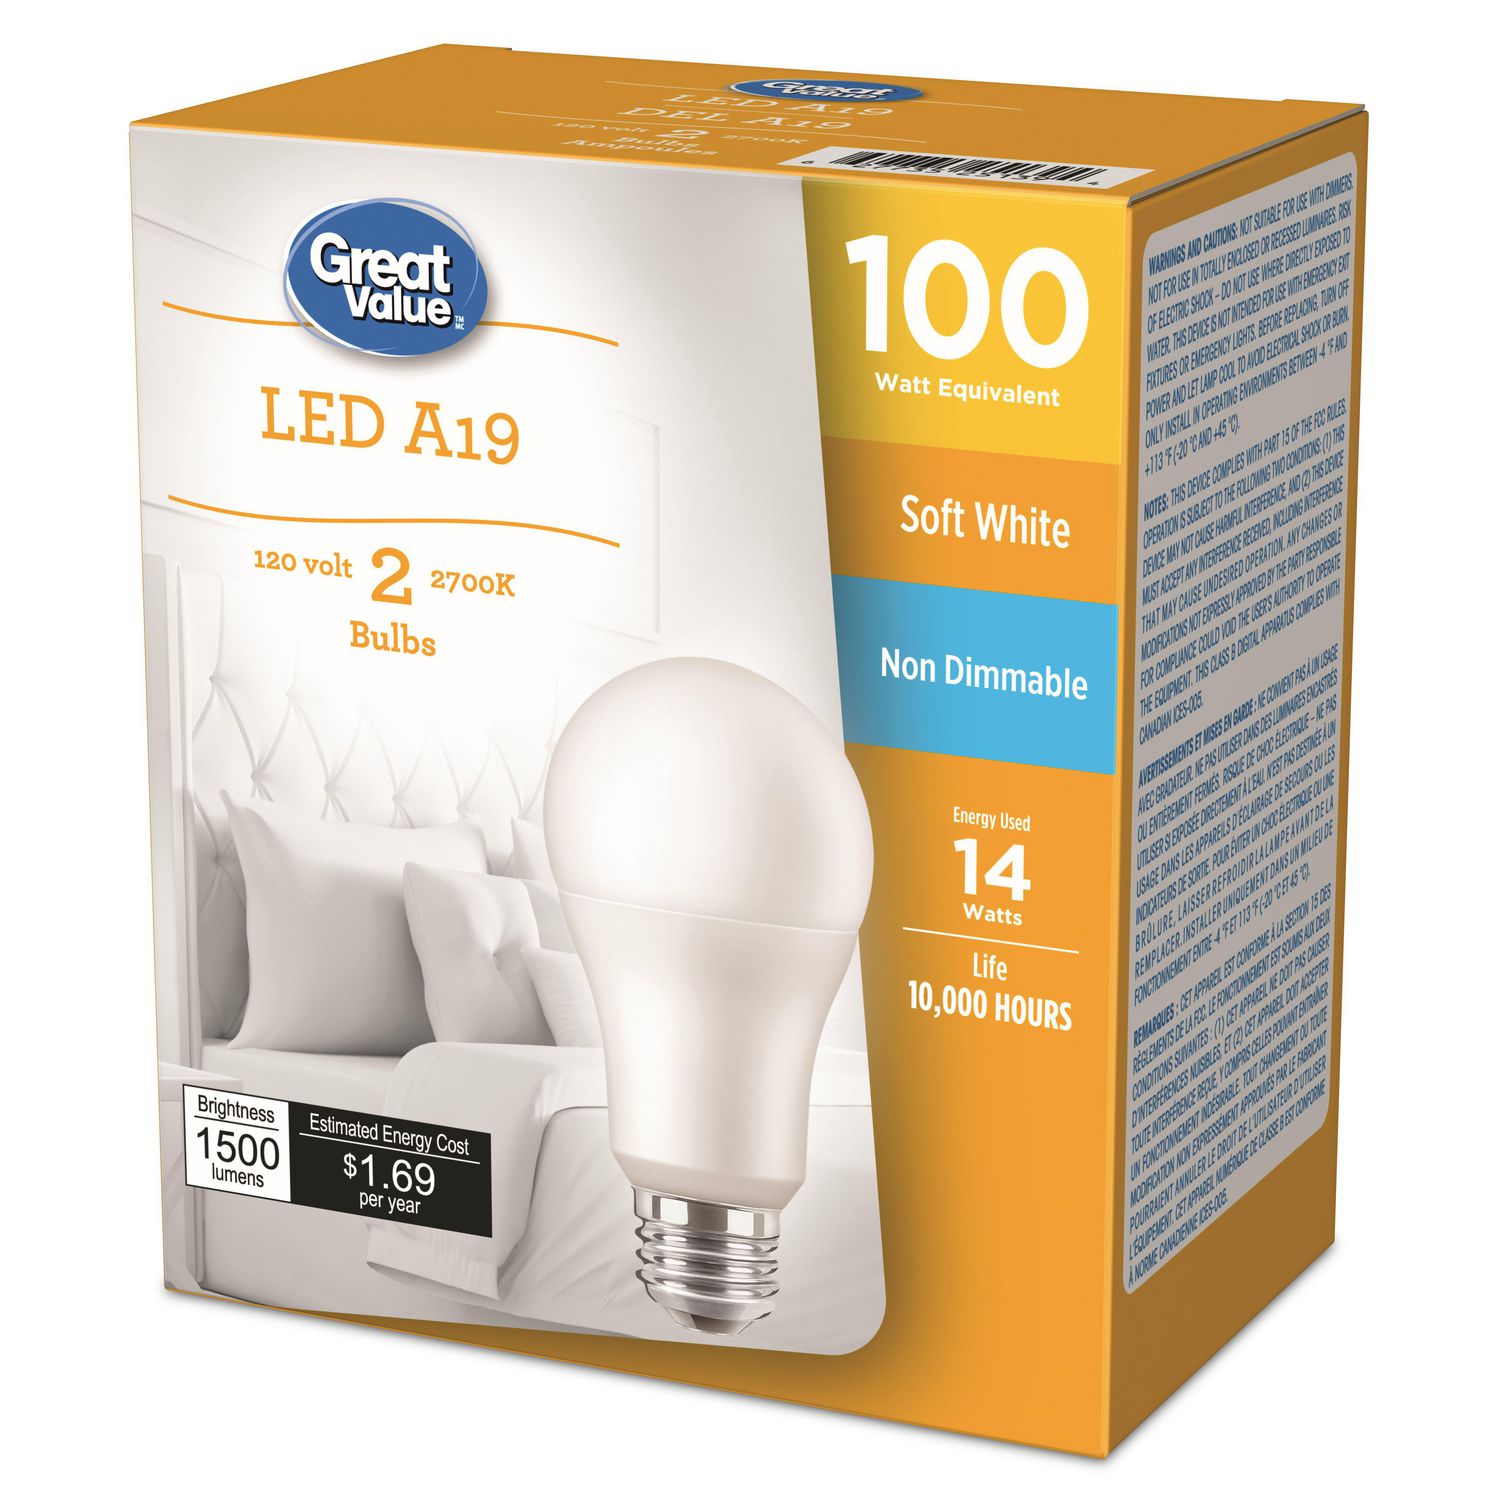 Great Value 100W A19 Soft White LED Light Bulbs - 2 Pack, Non